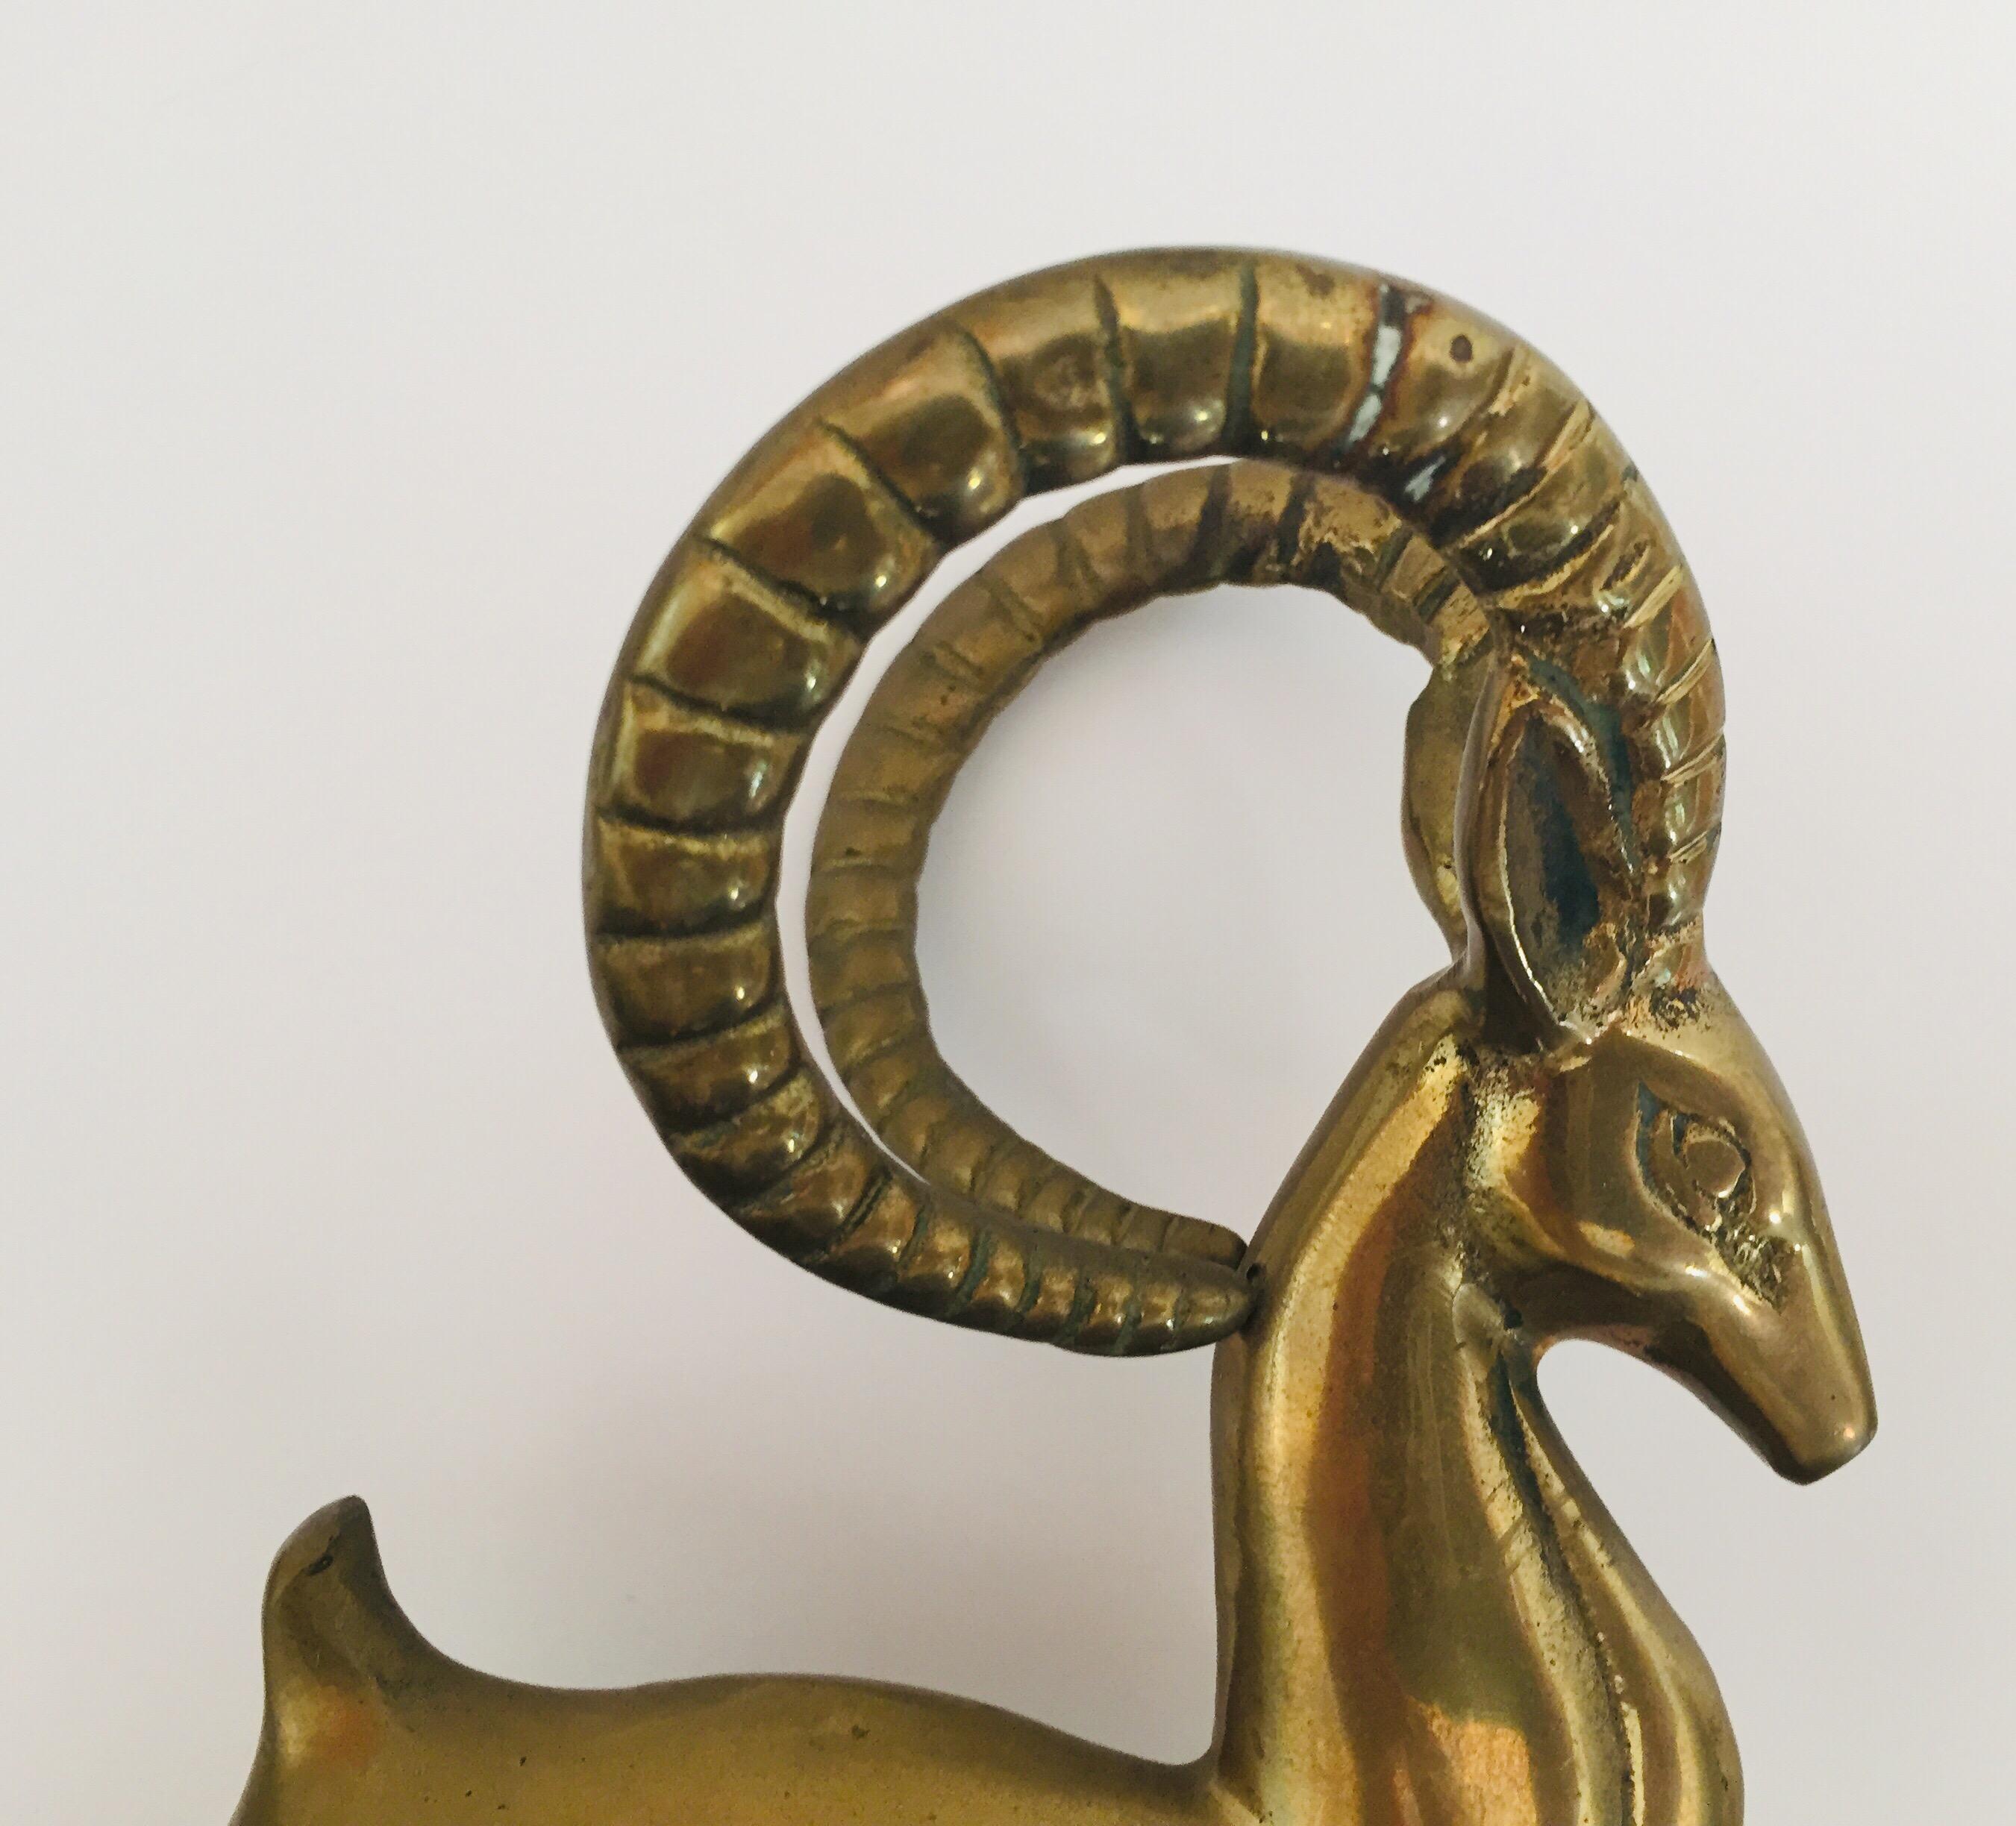 French Art Deco style brass metal animal sculpture of a gazelle, deer.
Cast brass gazelle sculpture mounted on a wooden base plate.
Great patina on brass, wood shows some wear, see pictures.